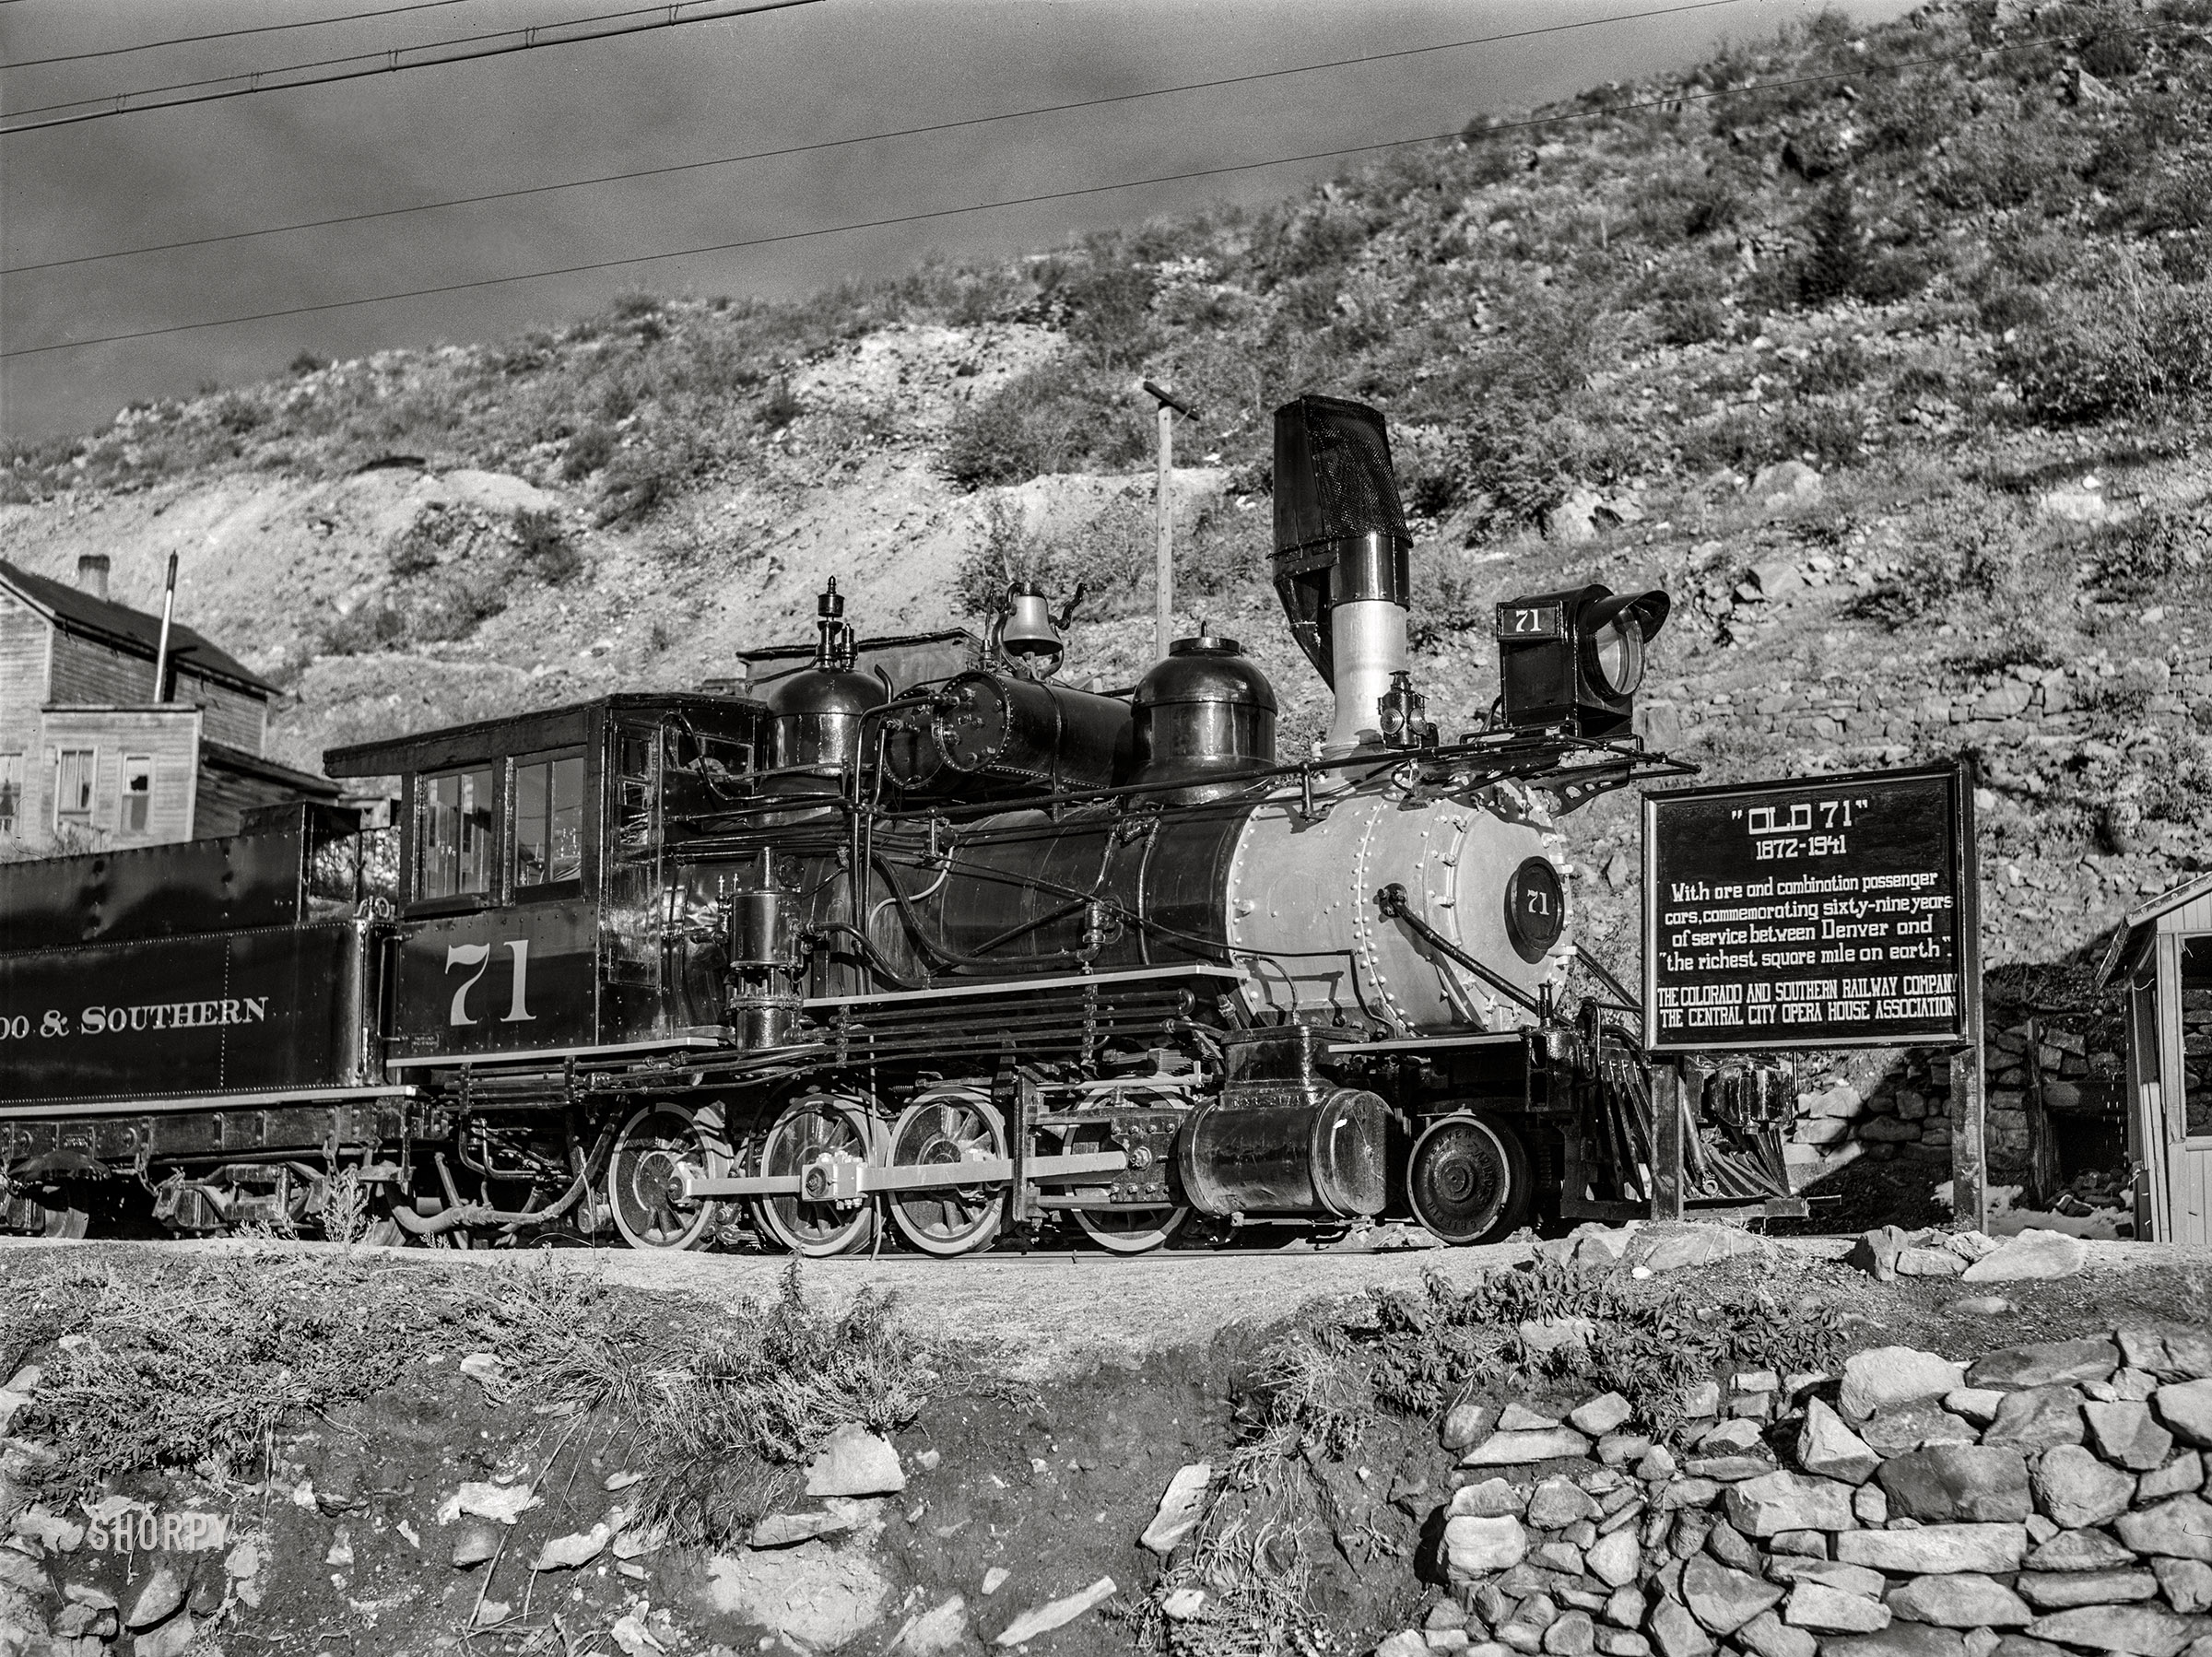 September 1941. Central City, Colorado. "The 'Old 71' engine of the Colorado and Southern Railway, which carried ore and passenger cars from Denver to 'the richest square mile on earth'." Medium format acetate negative by Marion Post Wolcott. View full size.